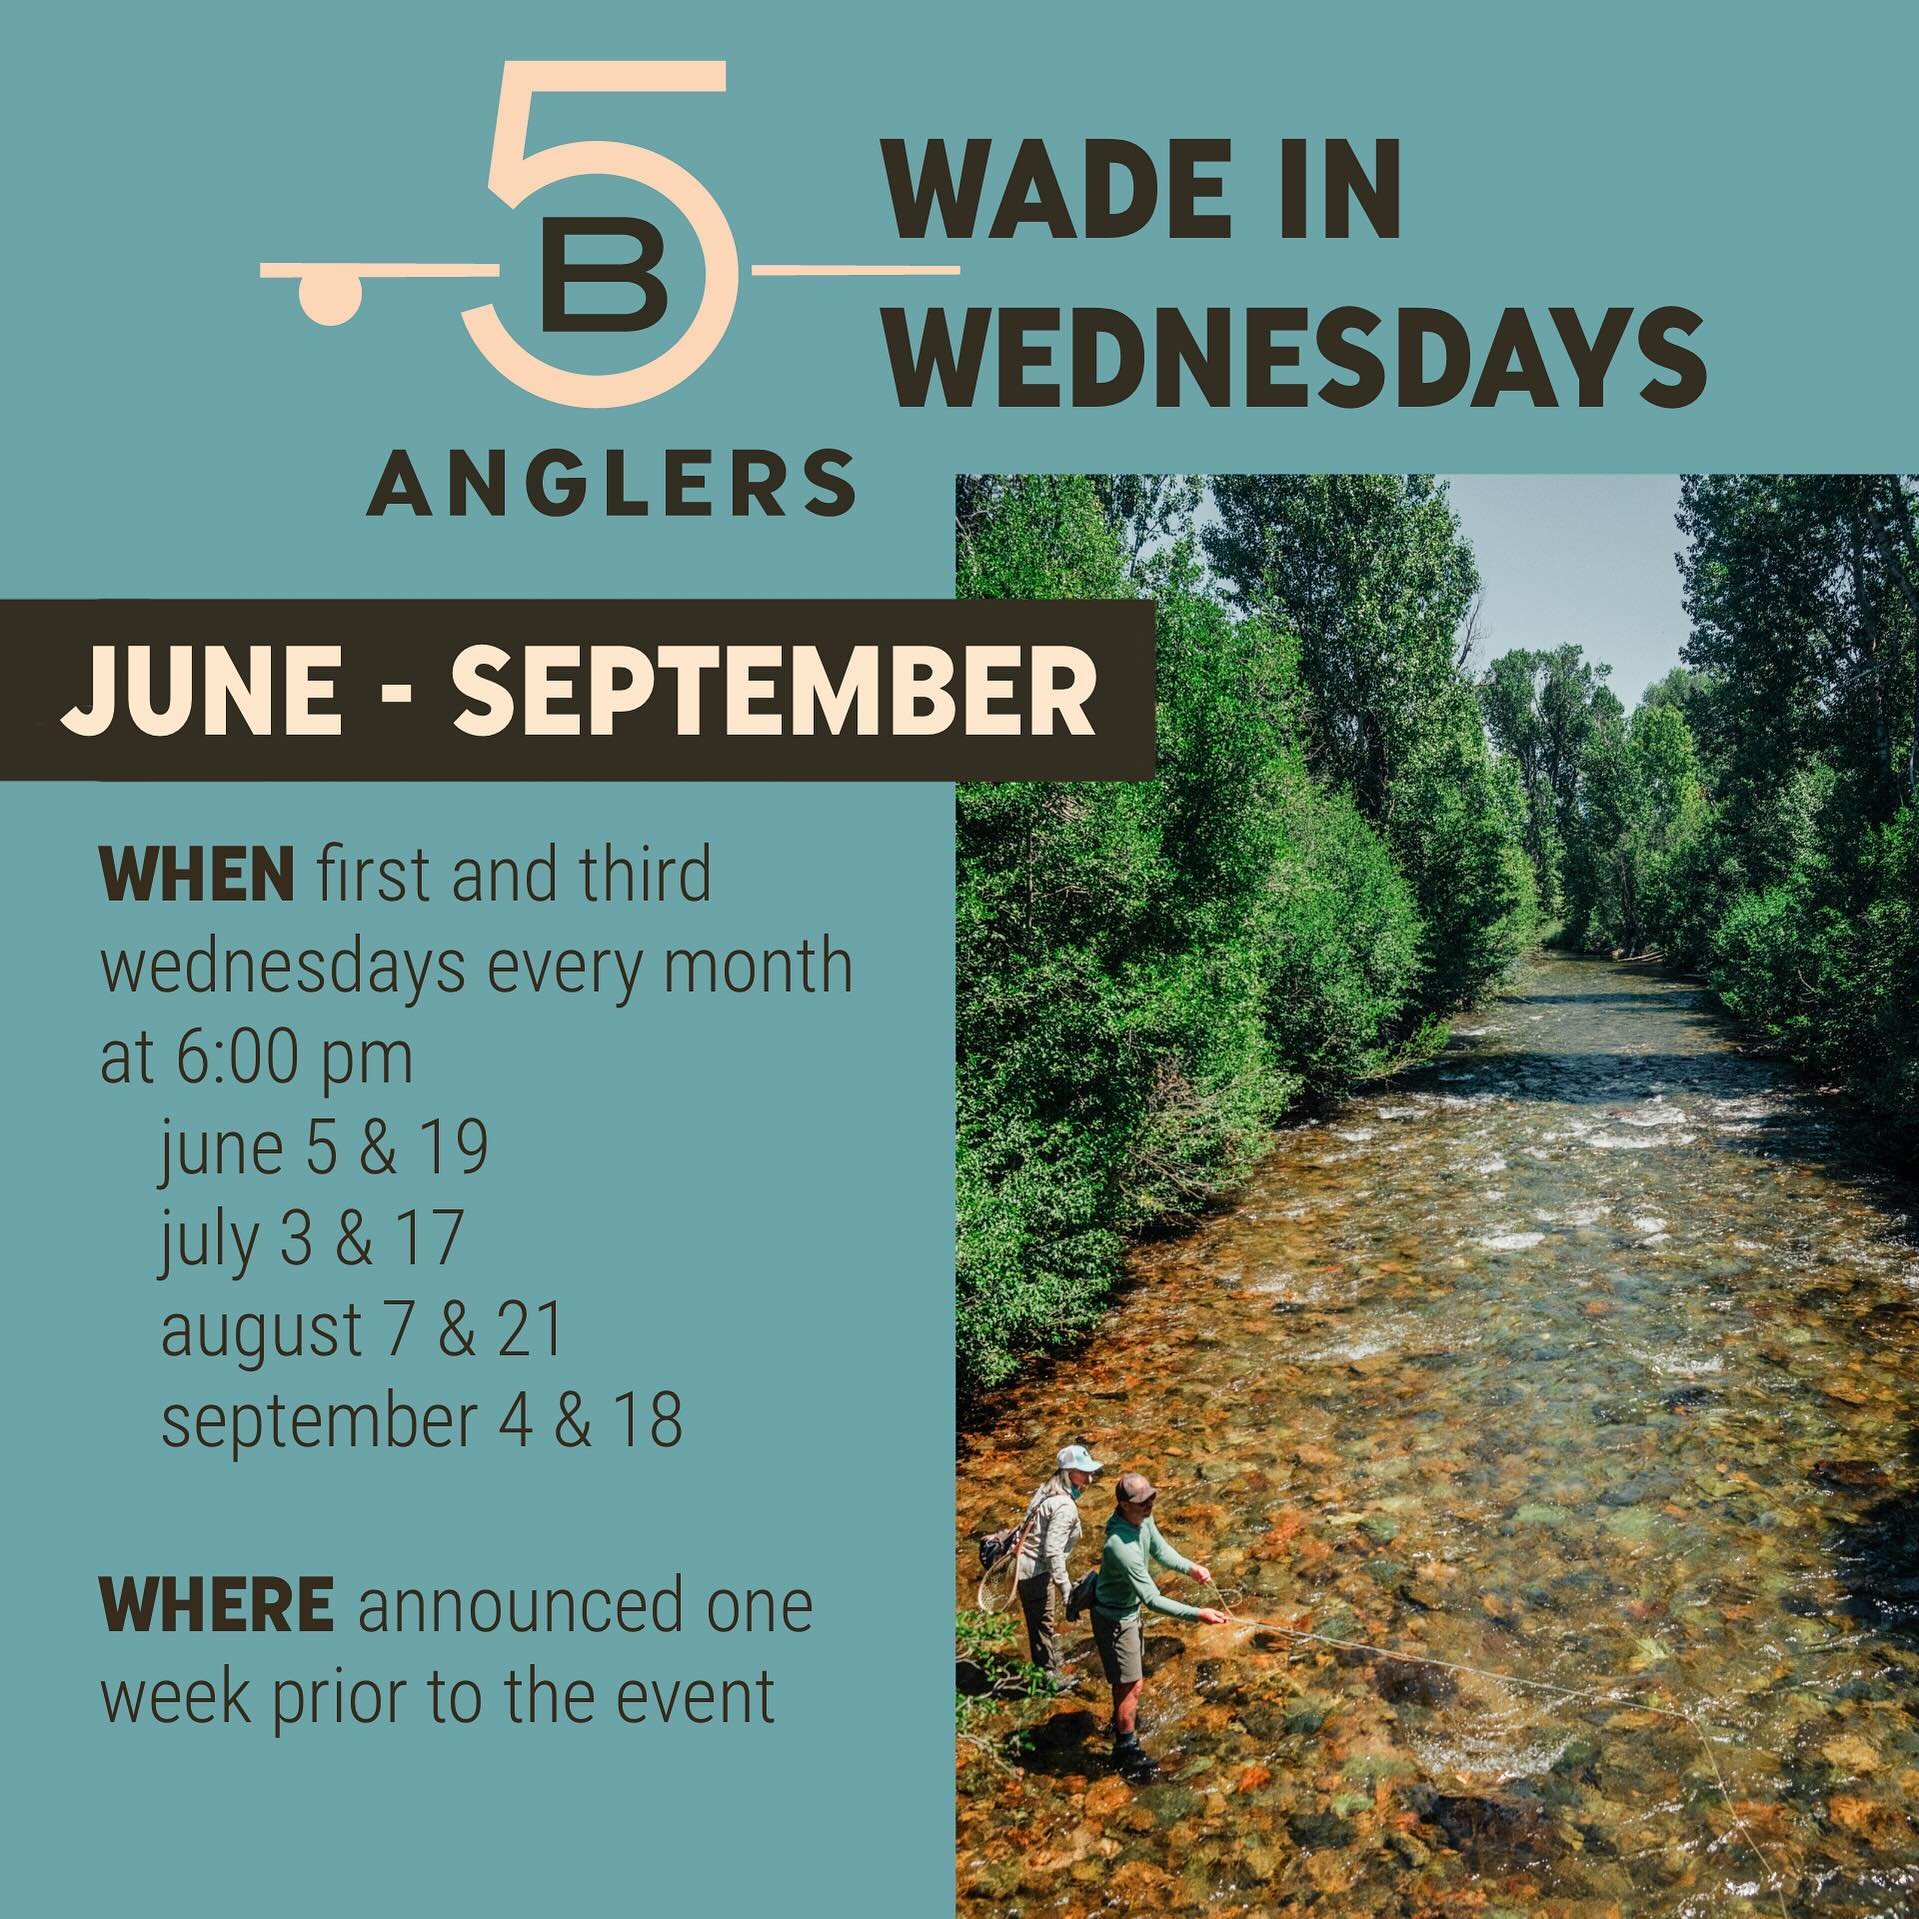 We&rsquo;re super stoked to announce a new season of Wade In Wednesdays! Join us on the first and third Wednesday every month from June to September to get out on the water for a little mid-week fishy fun. The location will be announced one week prio